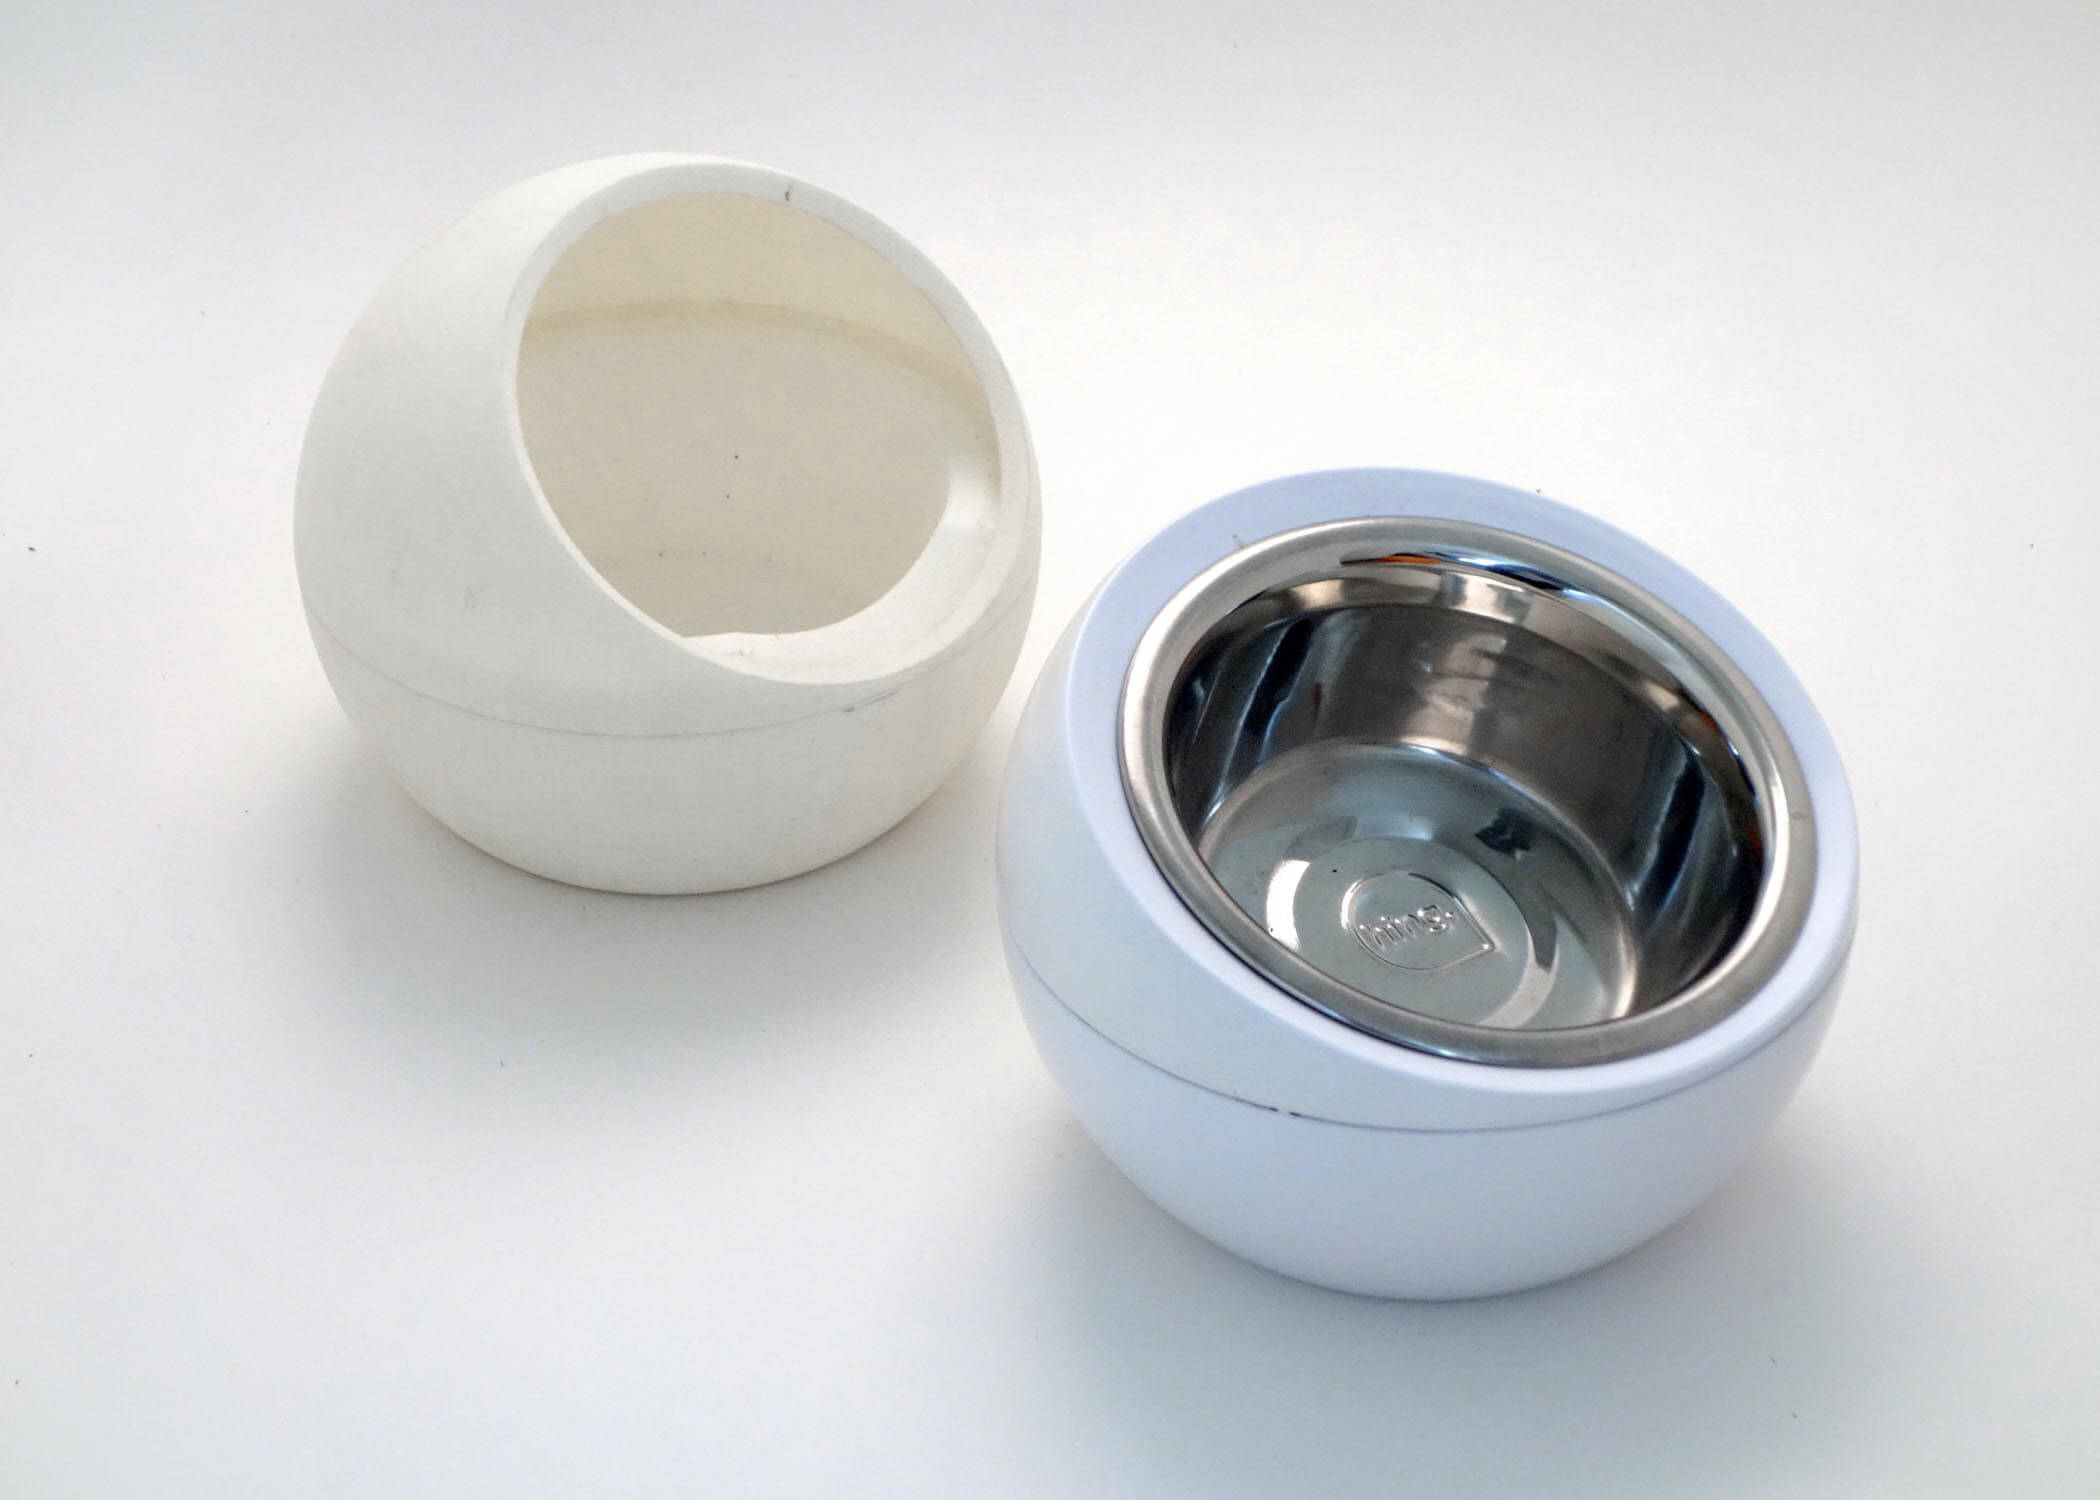 Hing dome bowl pet product design prototyping